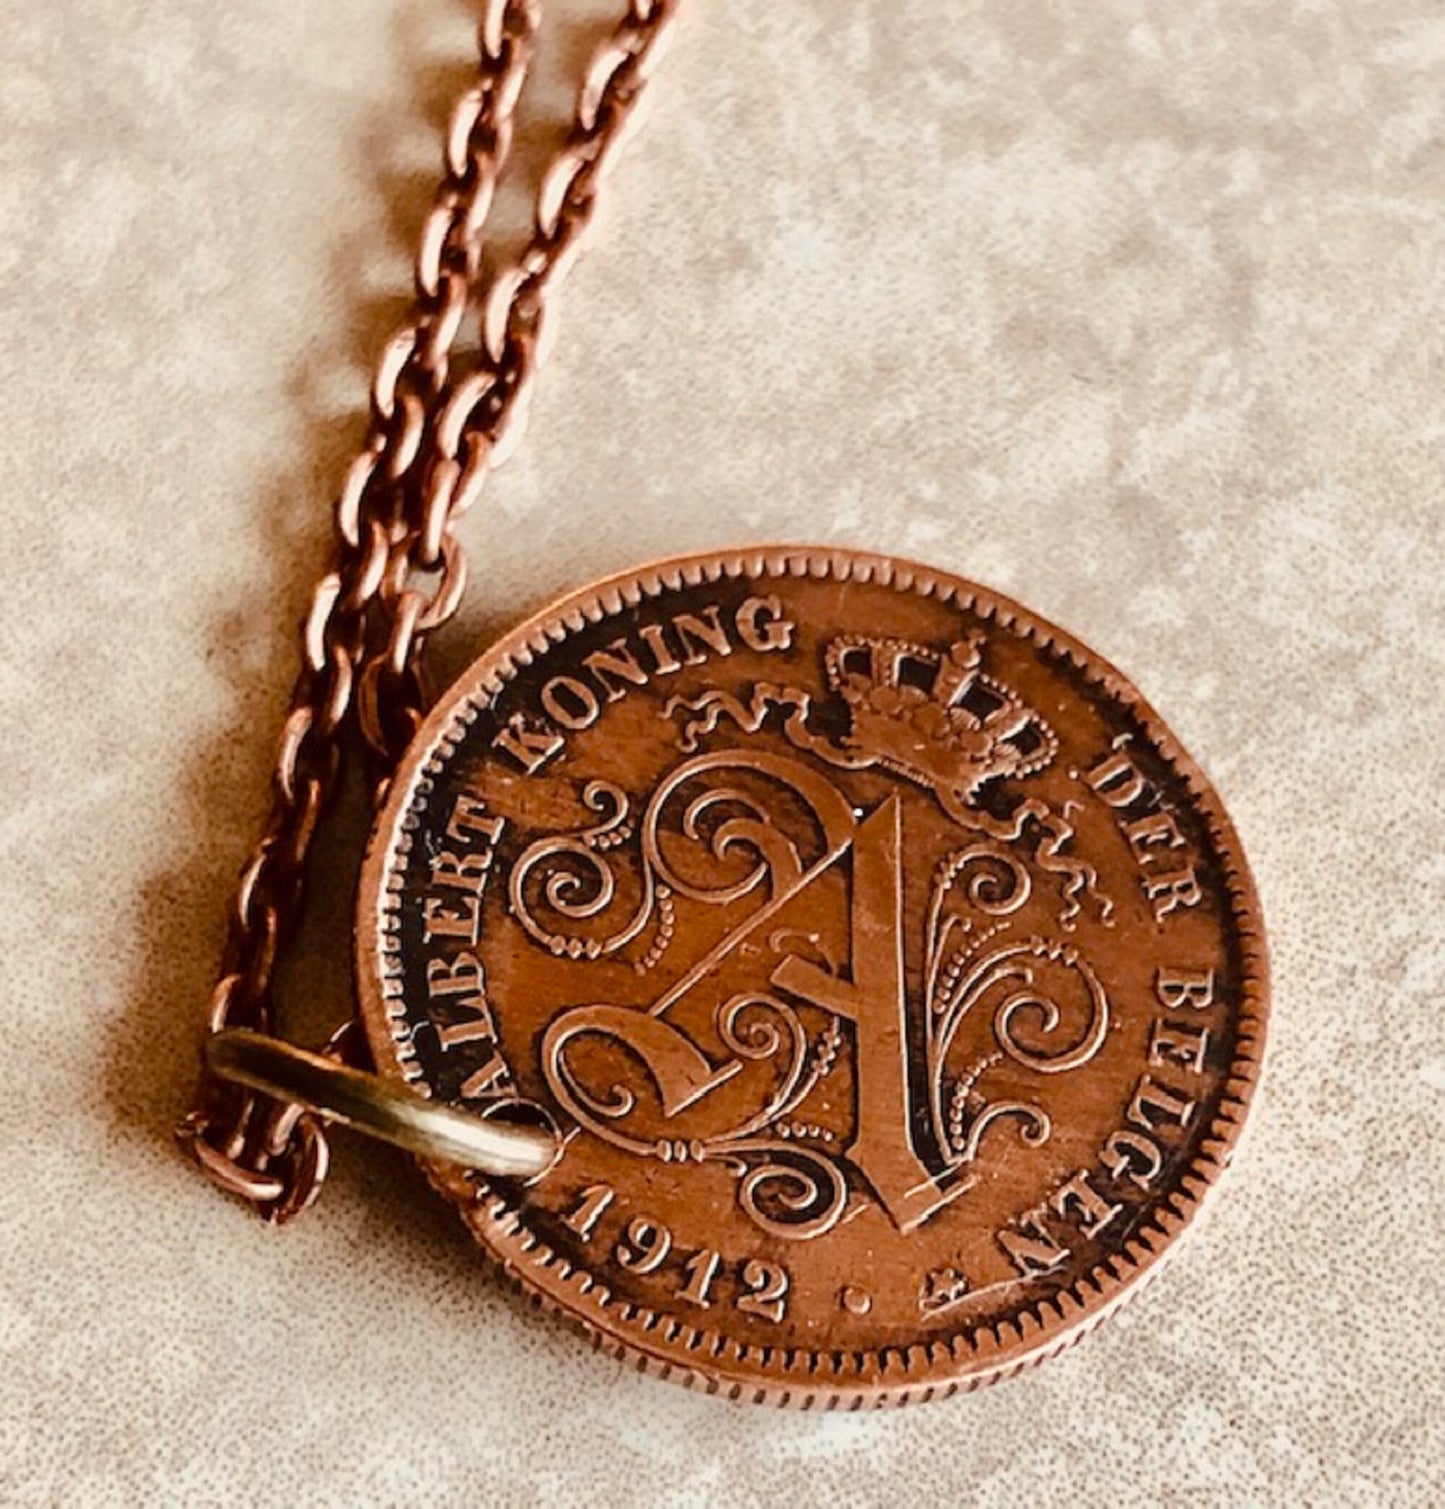 Belgium Coin Necklace 2 Cents Jewelry Pendant Personal Old Vintage Handmade Jewelry Gift Friend Charm For Him Her World Coin Collector